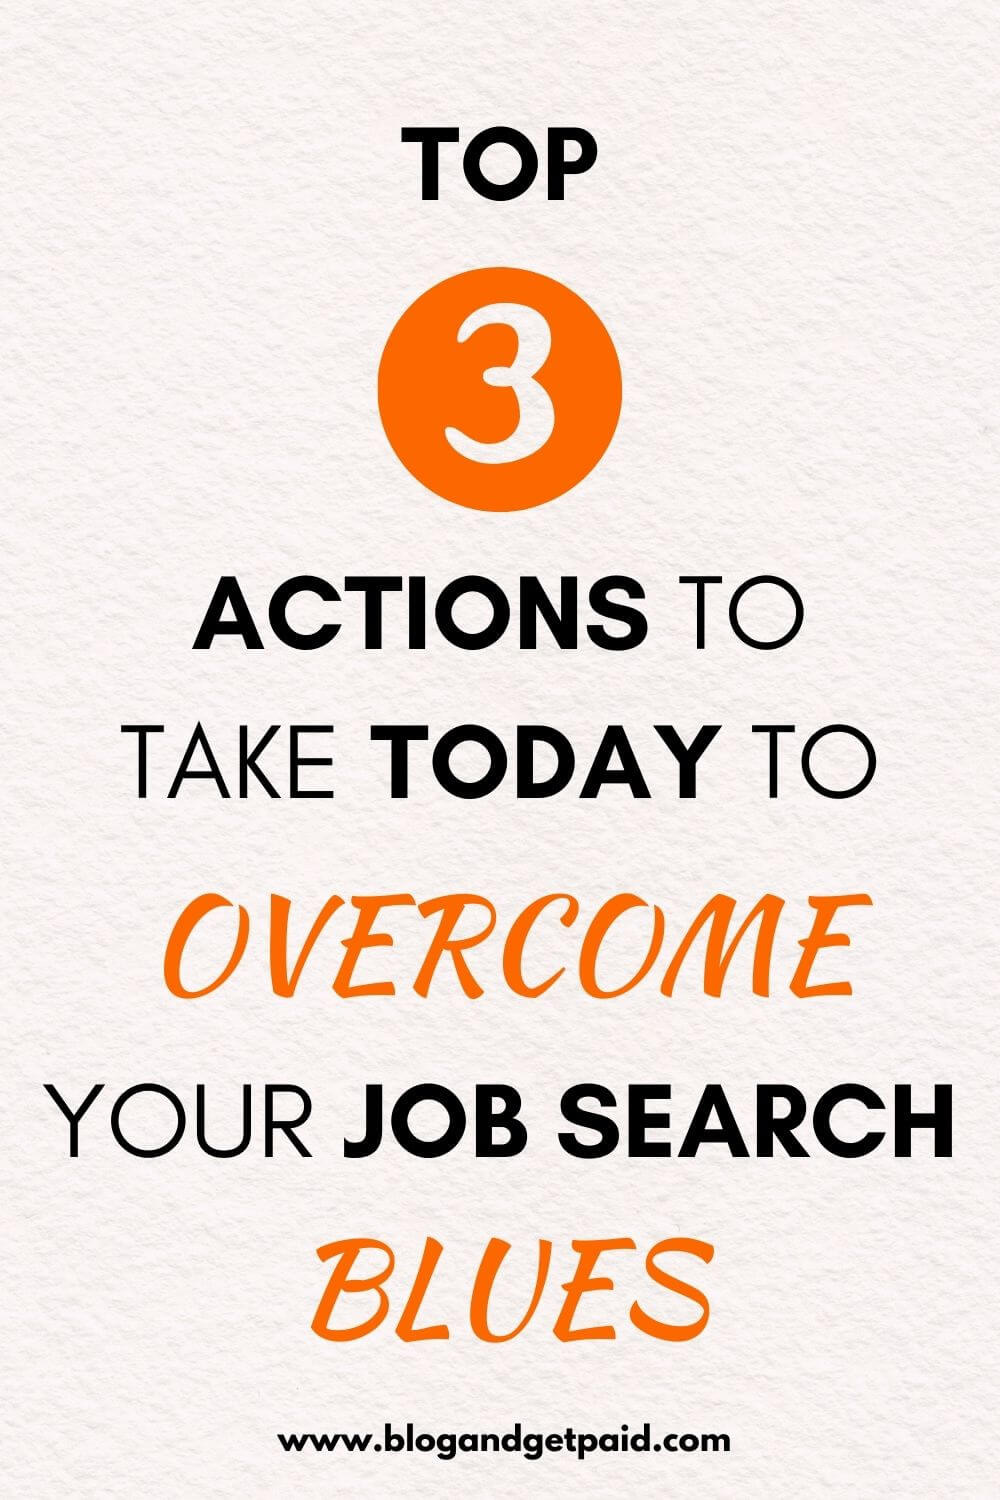 Overcome Your Job Search Blues Using Top 3 Proven Actions